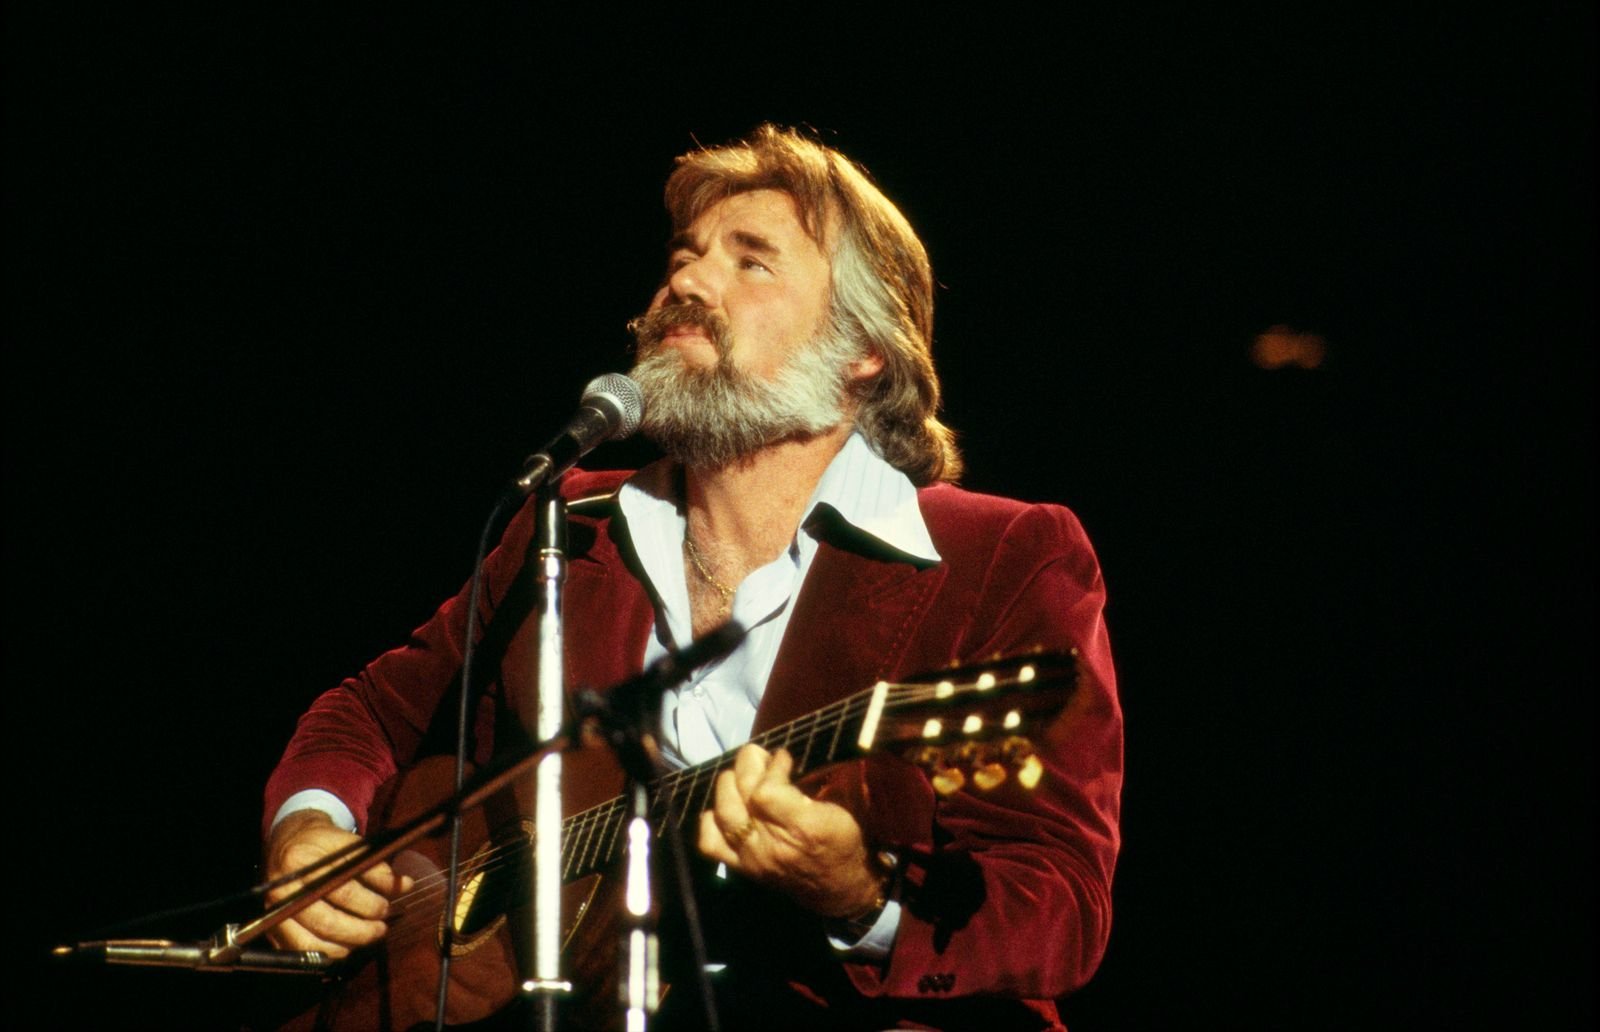 Kenny Rogers performing on stage in 1978 | Source: Getty Images